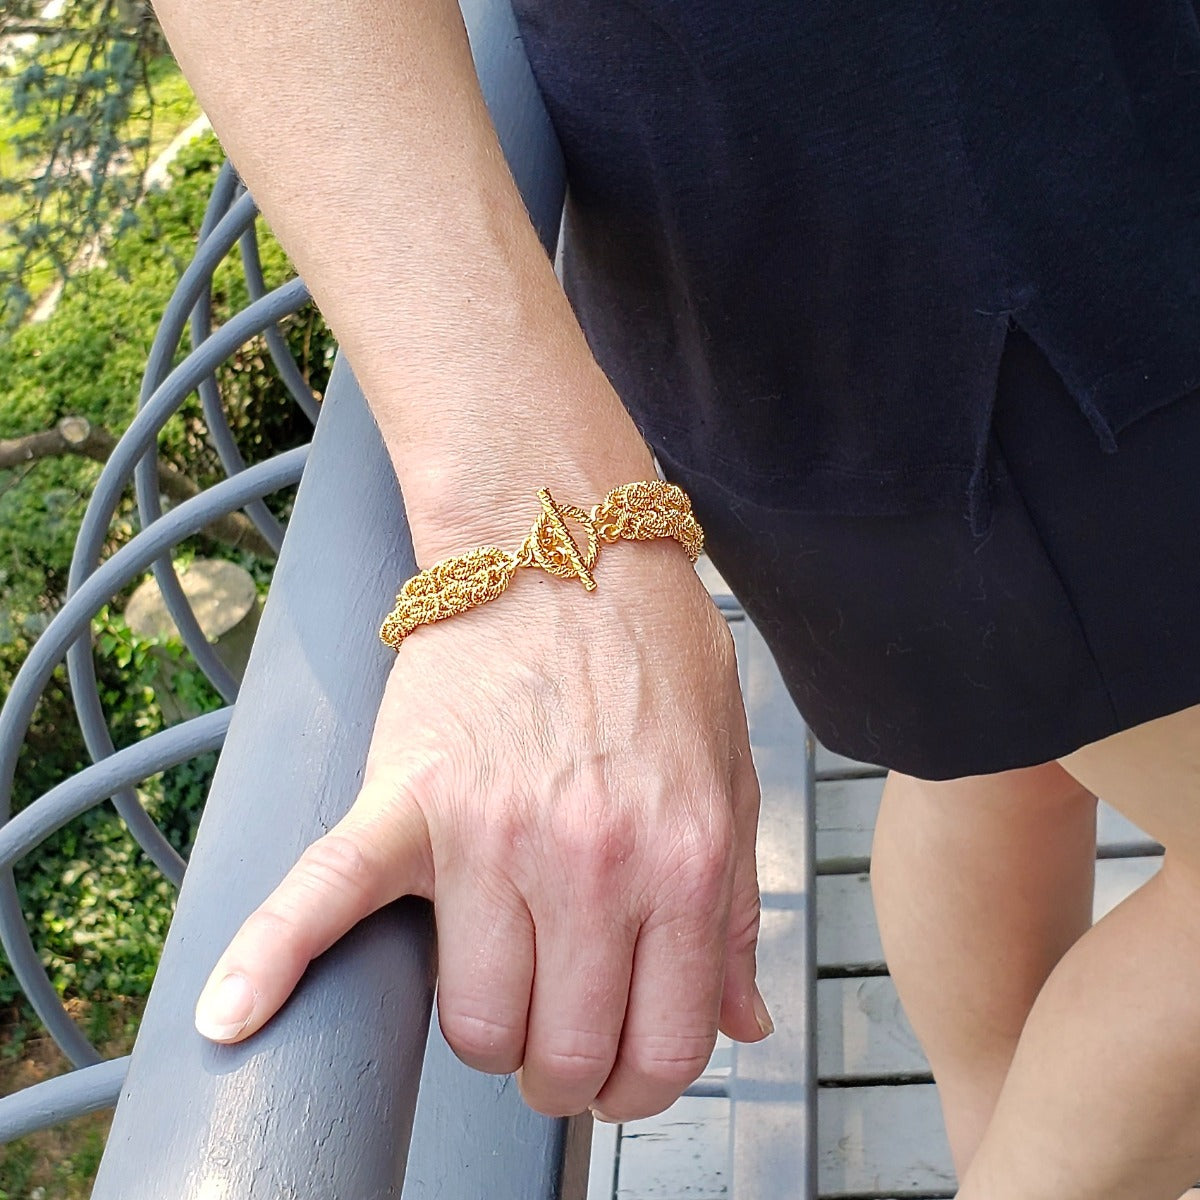 Arpaia Gold Vermeil Double Byzantine Bracelet on Model with clasp face up - outside natural light